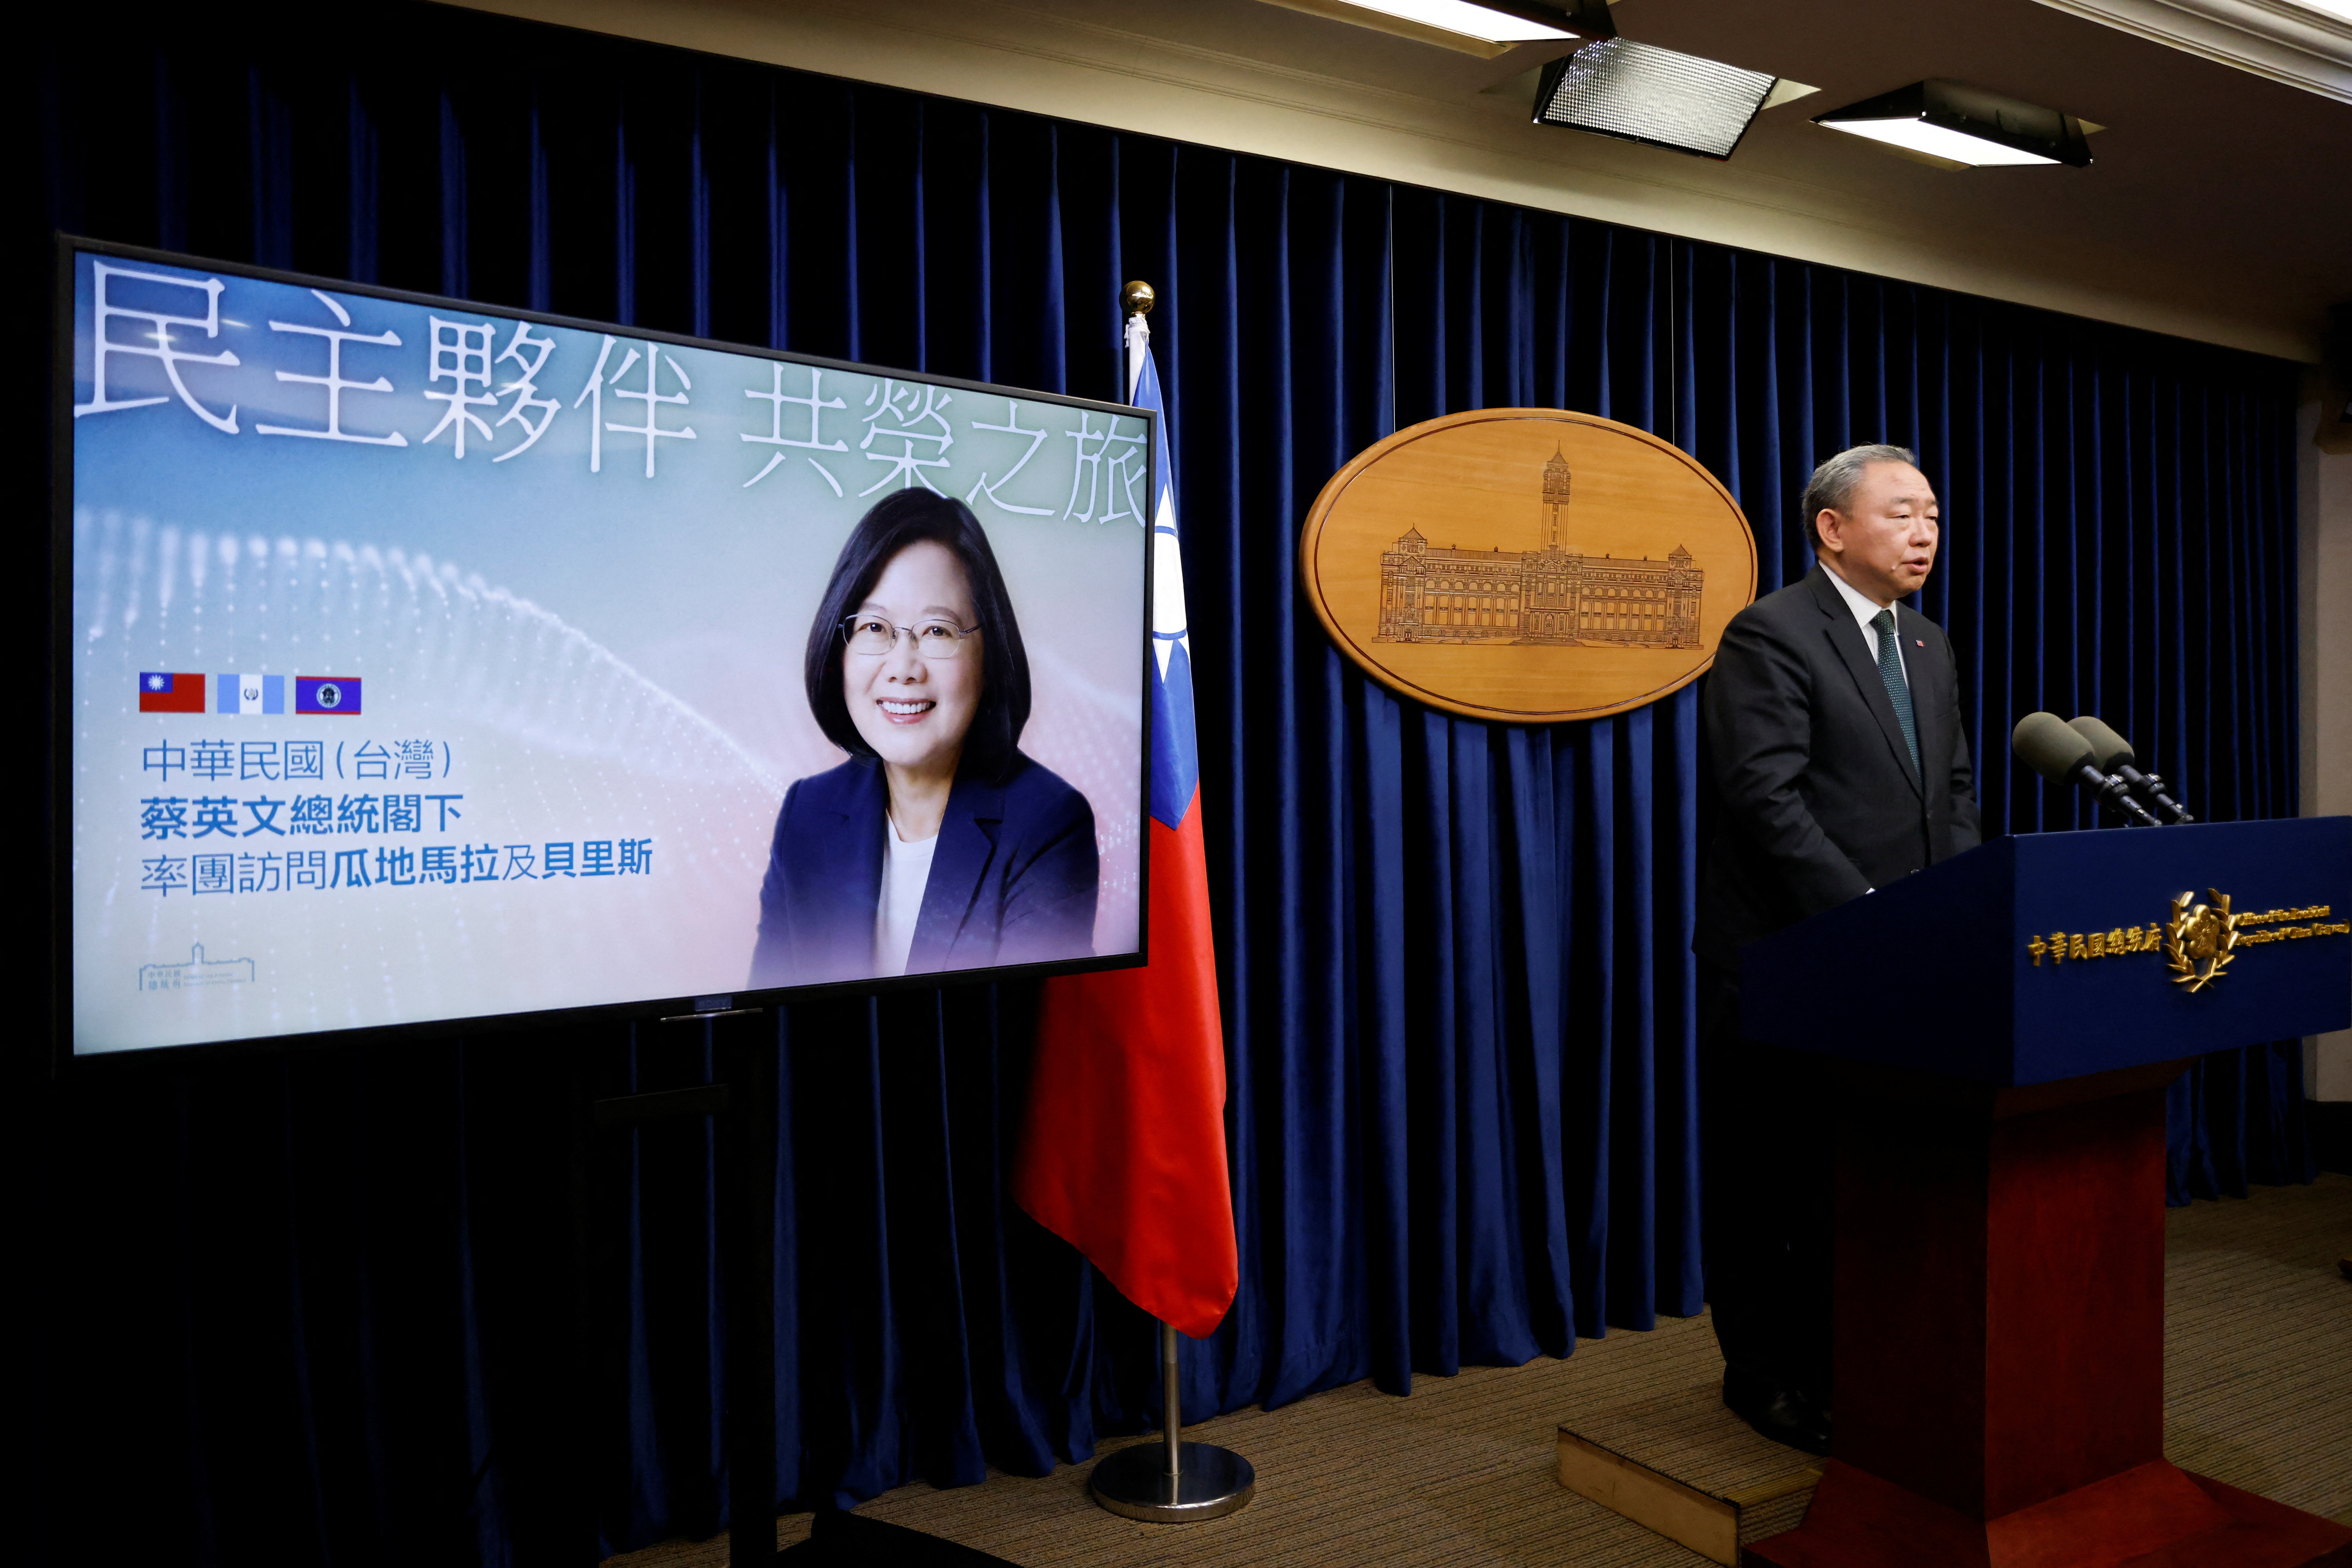 Taiwan Vice Foreign Minister Alexander Yui speaks during a news conference in Taipei